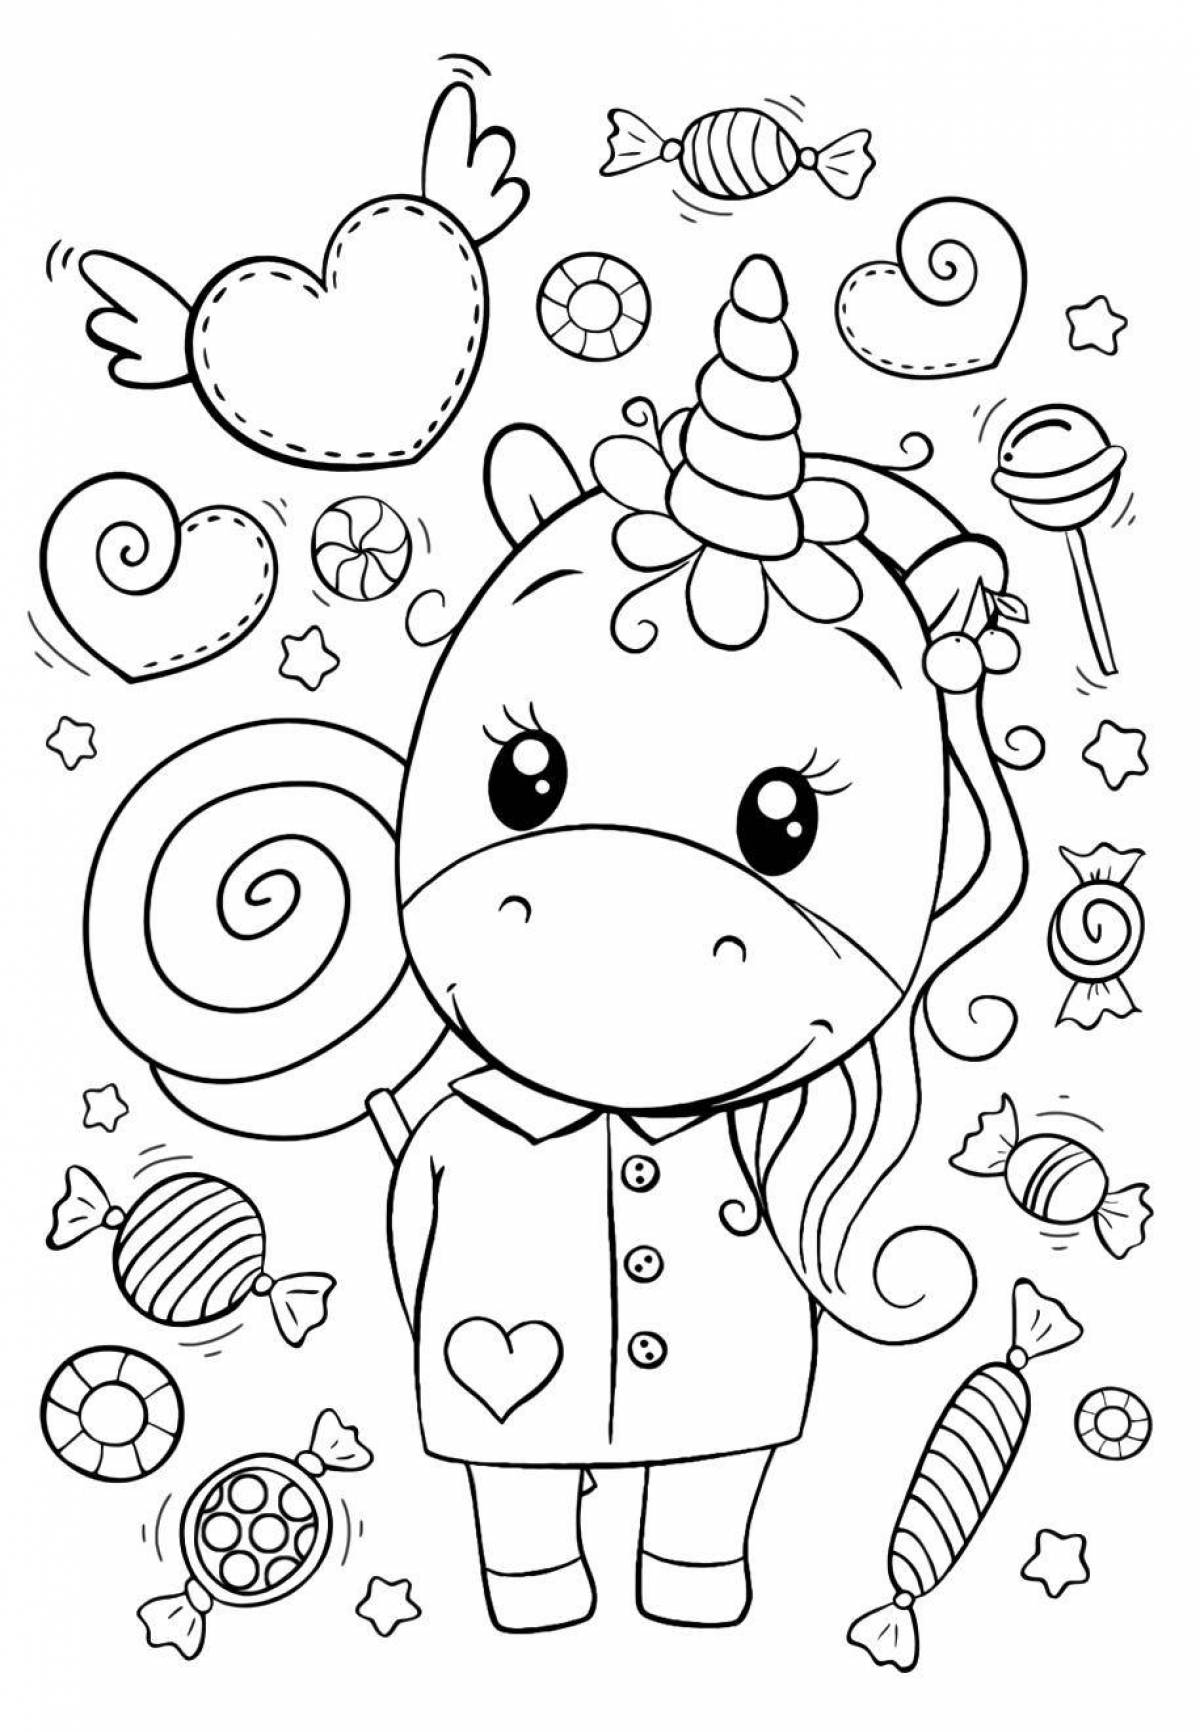 Coloring cute unicorn for kids